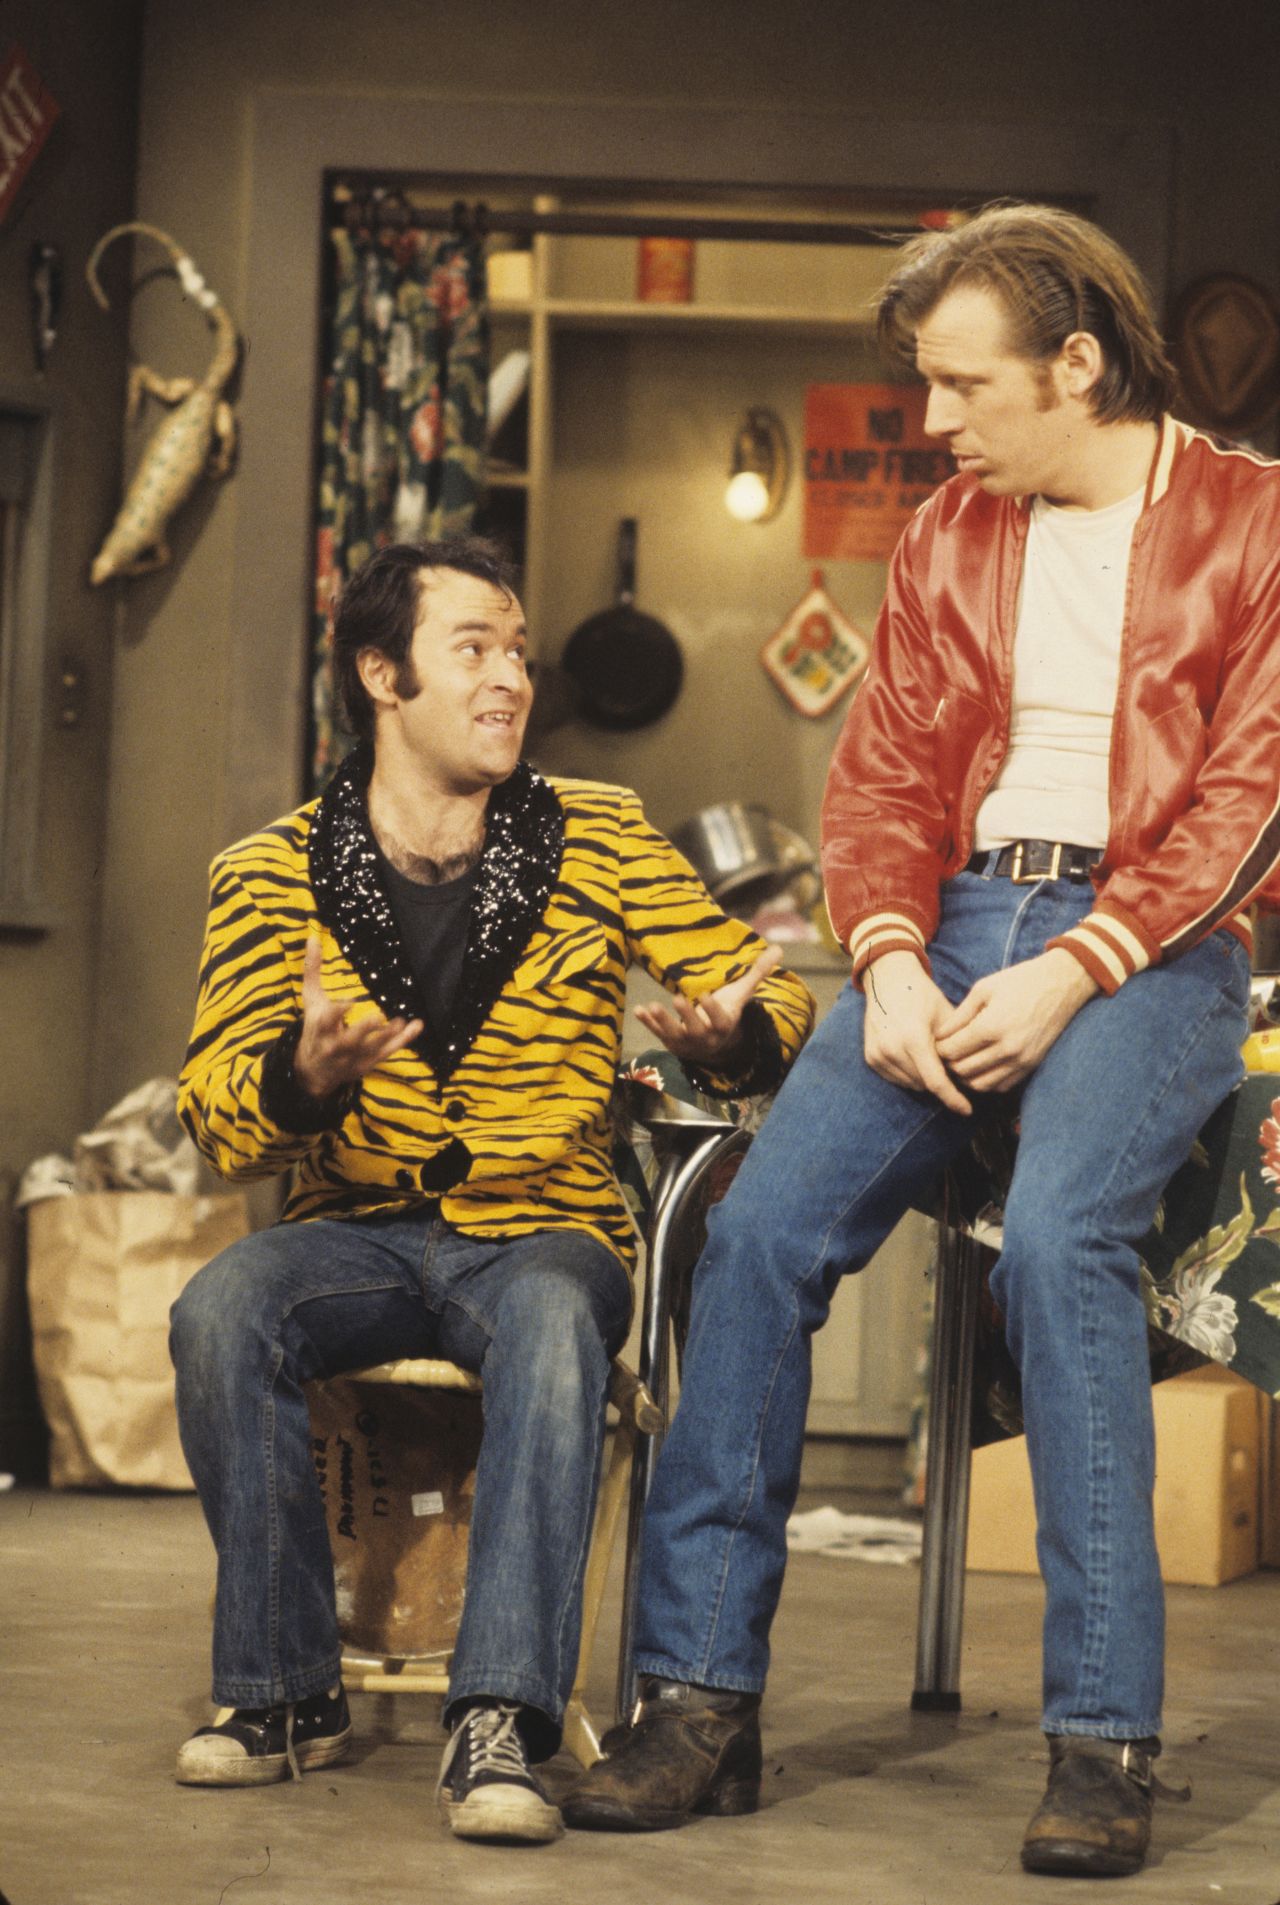 David Lander, left, who played Squiggy on TV's "Laverne & Shirley," hid his diagnosis for 15 years "primarily because I didn't think show business would embrace the fact that I have a chronic disease known as multiple sclerosis," he said in a 2001 <a href="http://transcripts.cnn.com/TRANSCRIPTS/0105/17/lad.08.html">interview with CNN</a>. 